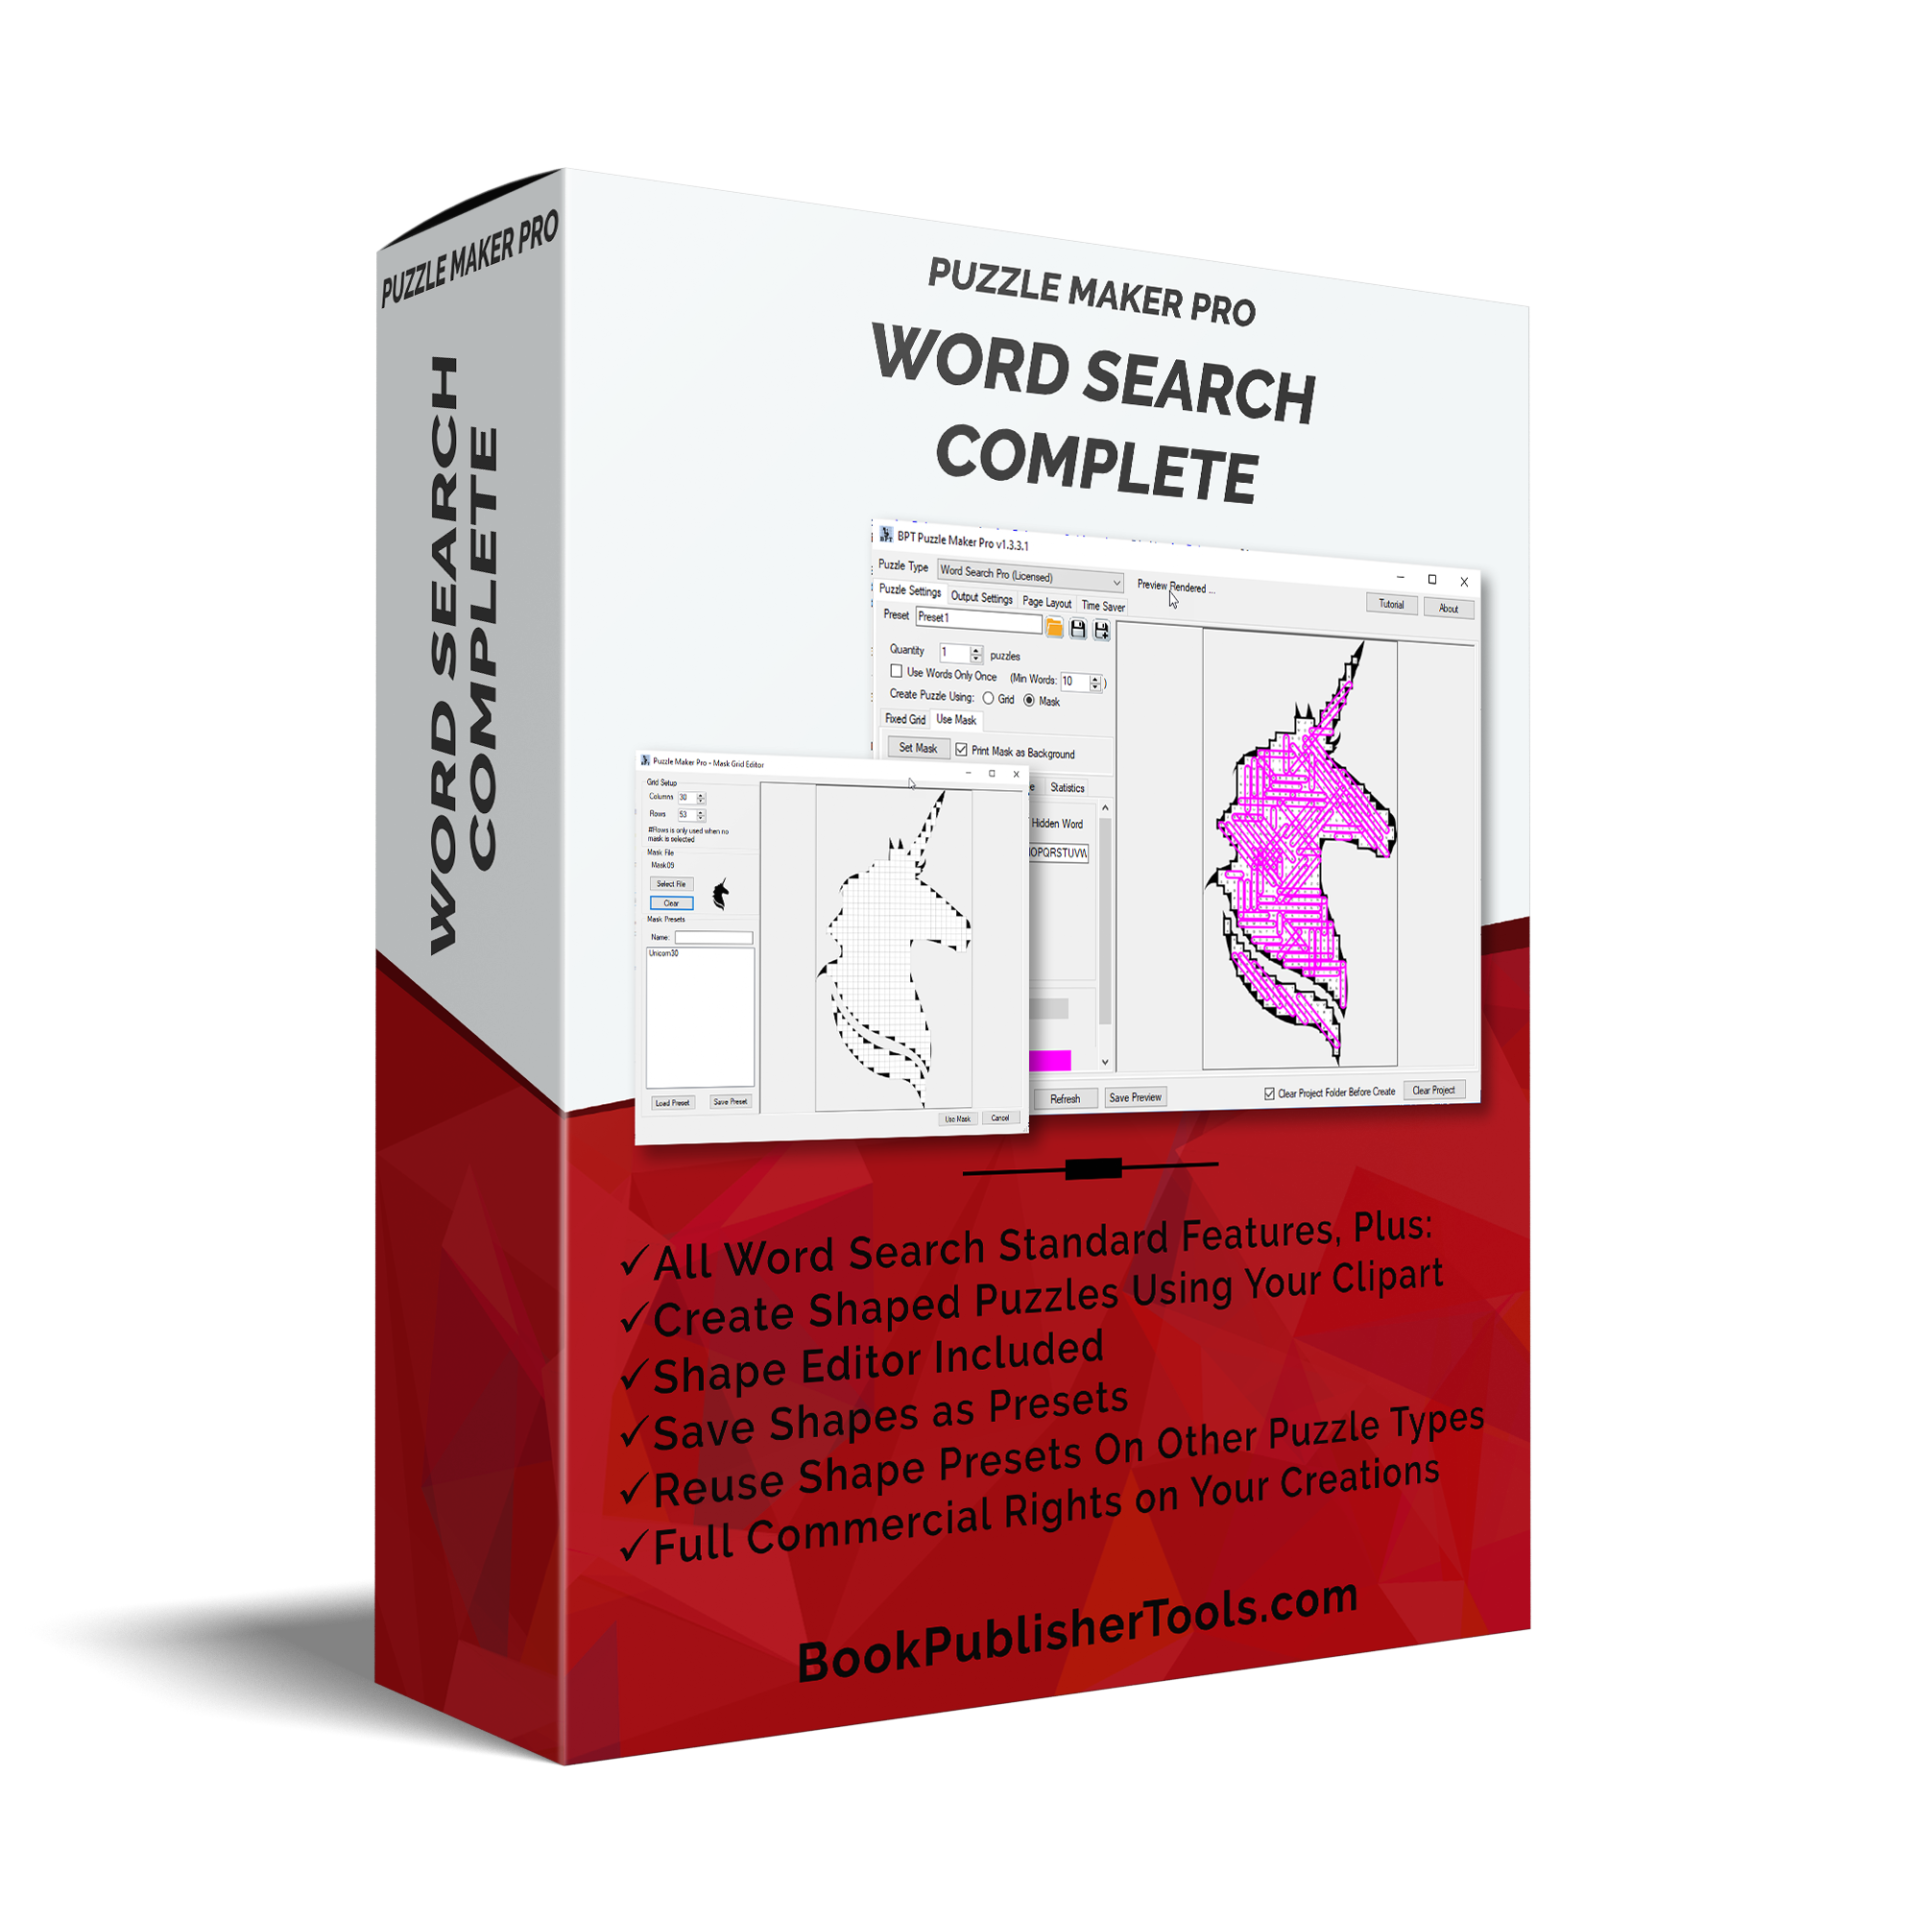 puzzle-maker-pro-word-search-complete-bookpublishertools